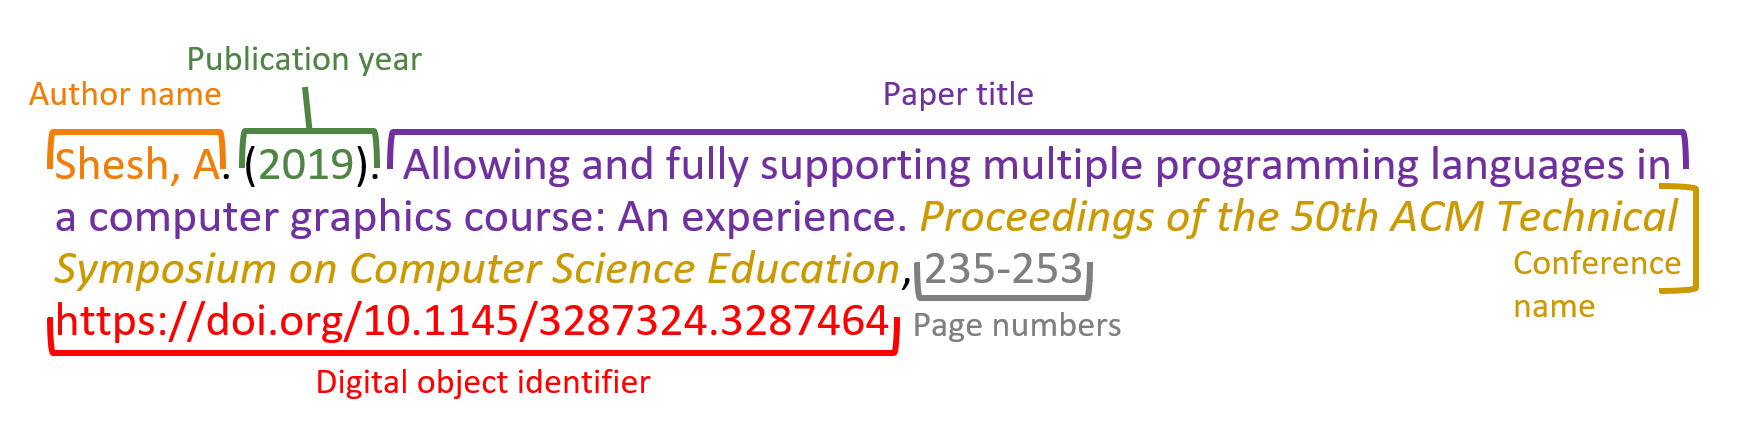 Author name: Shesh, A. Publication year: (2019). Paper title: Allowing and fully supporting multiple programming languages in a computer graphics course: An experience. Conference name: Proceedings of the 50th ACM Technical Symposium on Computer Science Education, Page numbers: 235-253.Digital object identifier: https://doi.org/10.1145/3287324.3287464